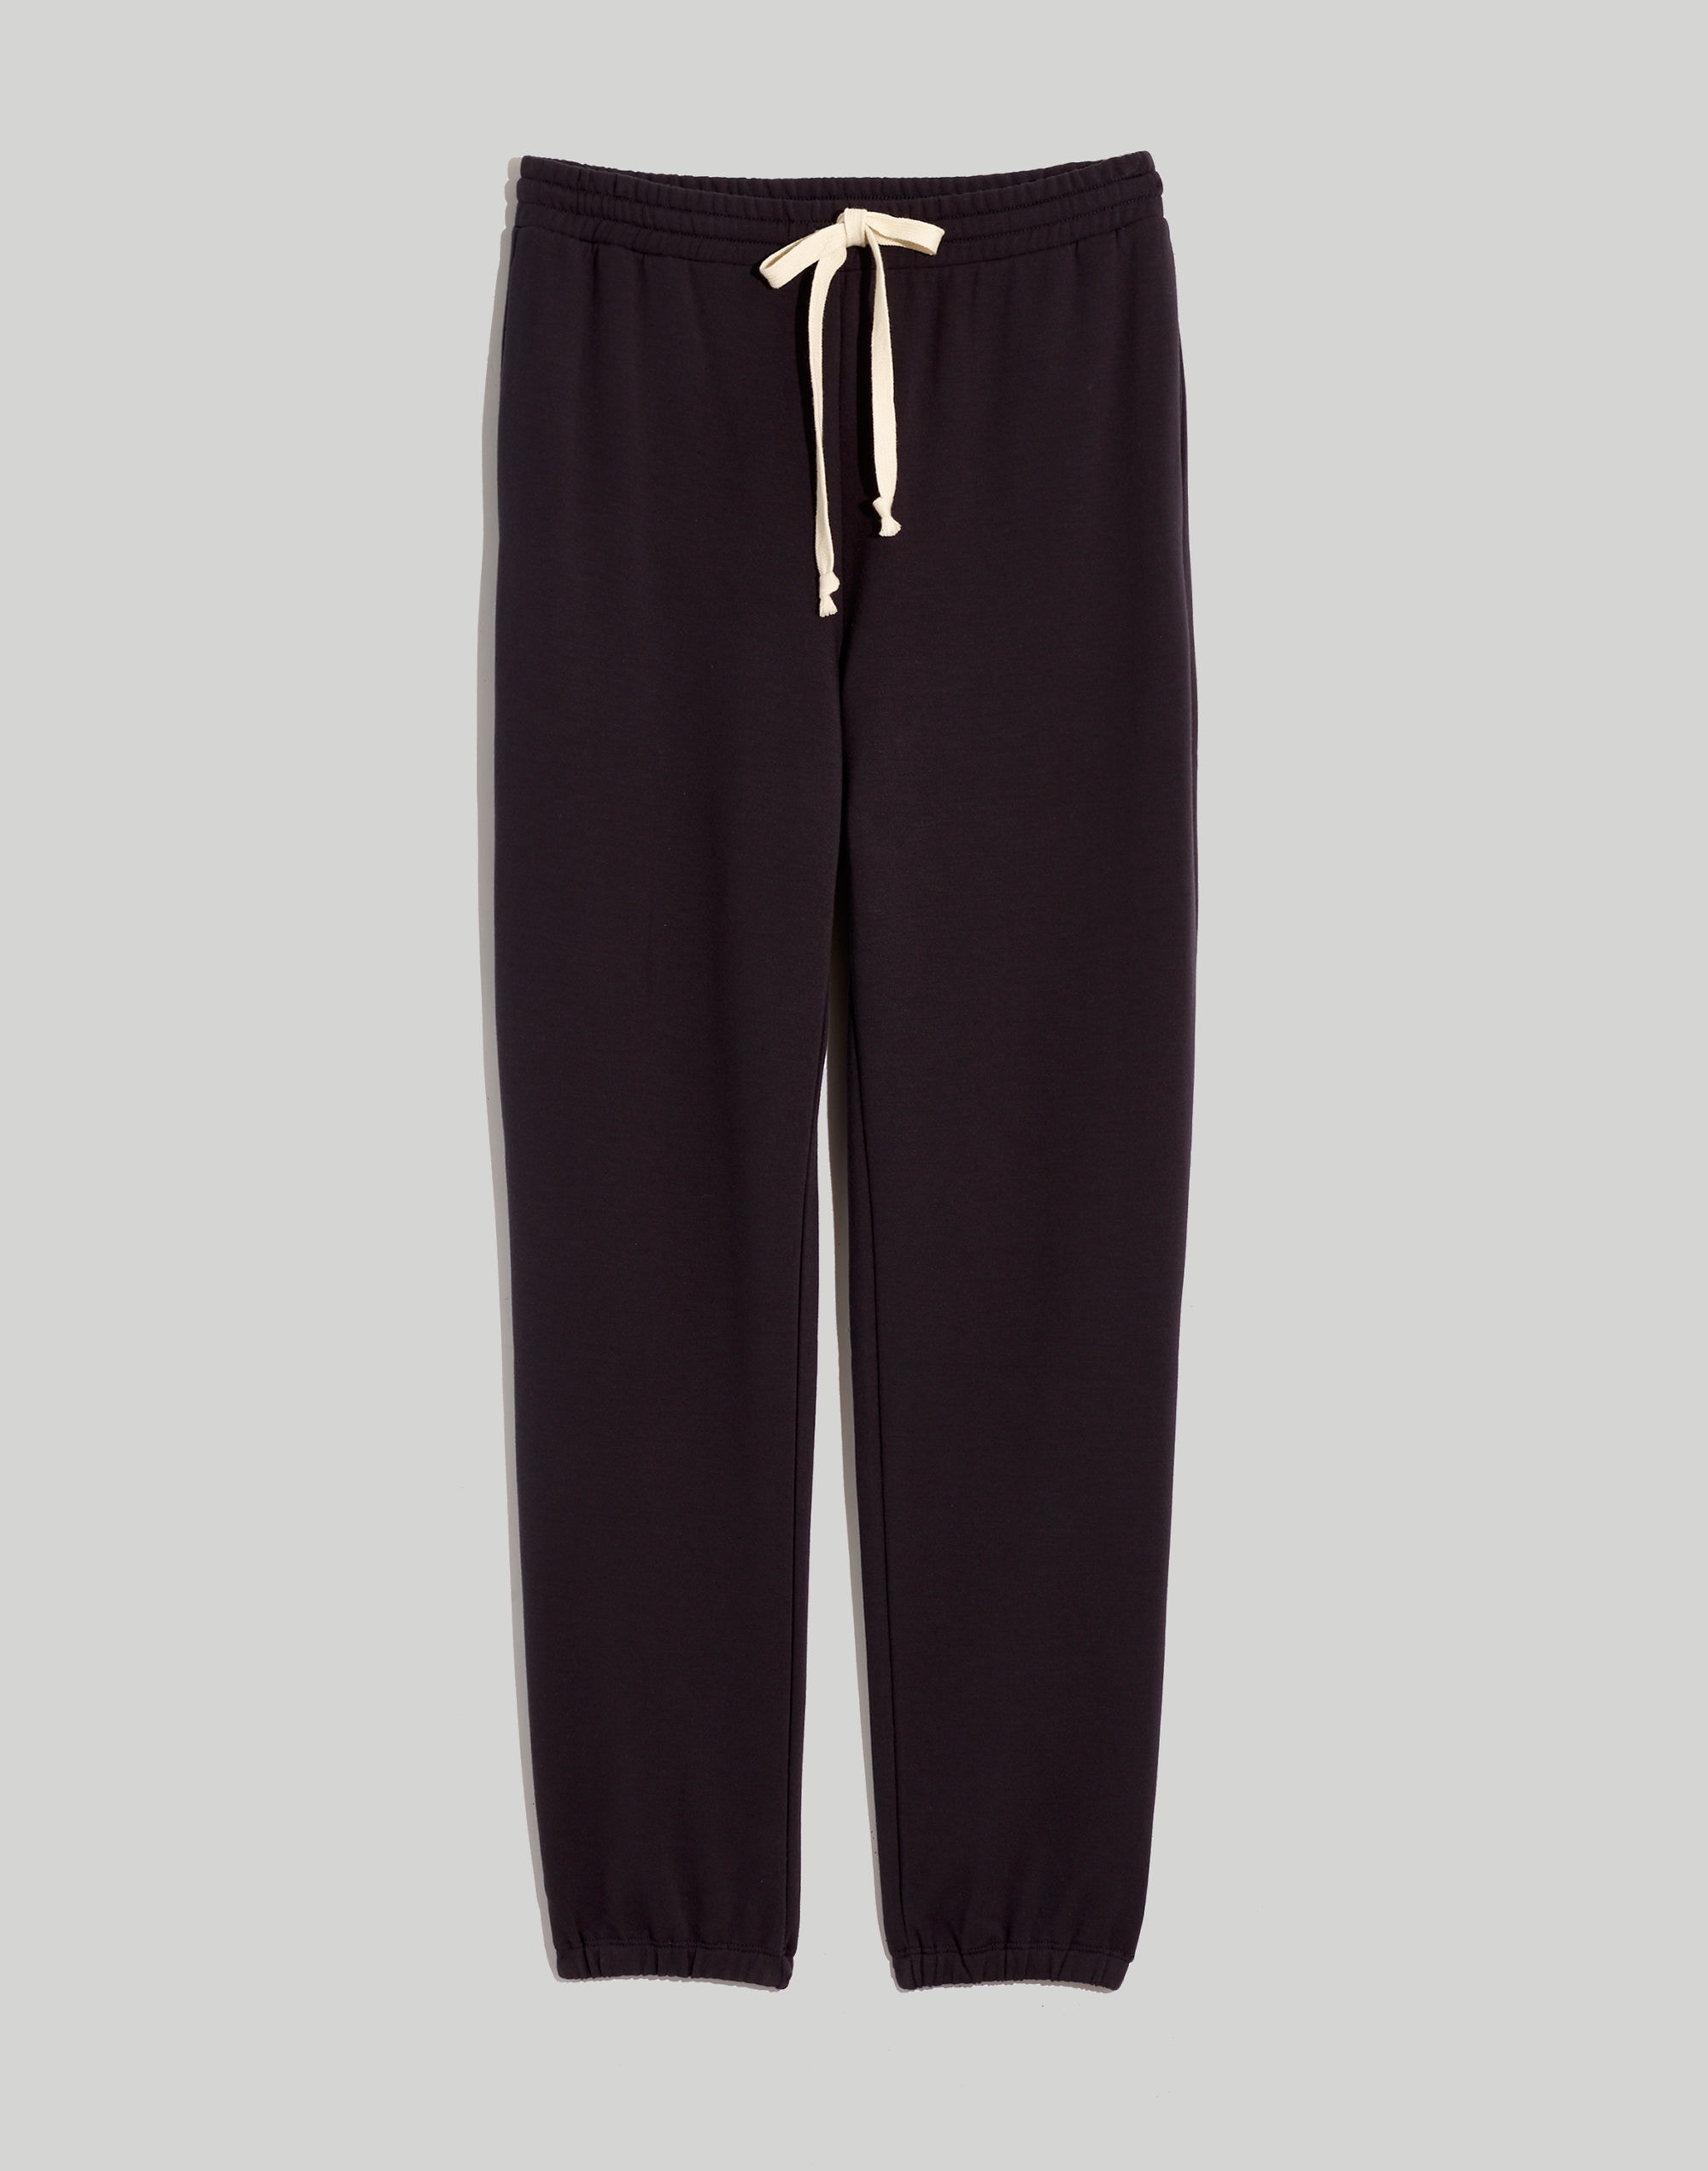 Plus Superbrushed Easygoing Sweatpants